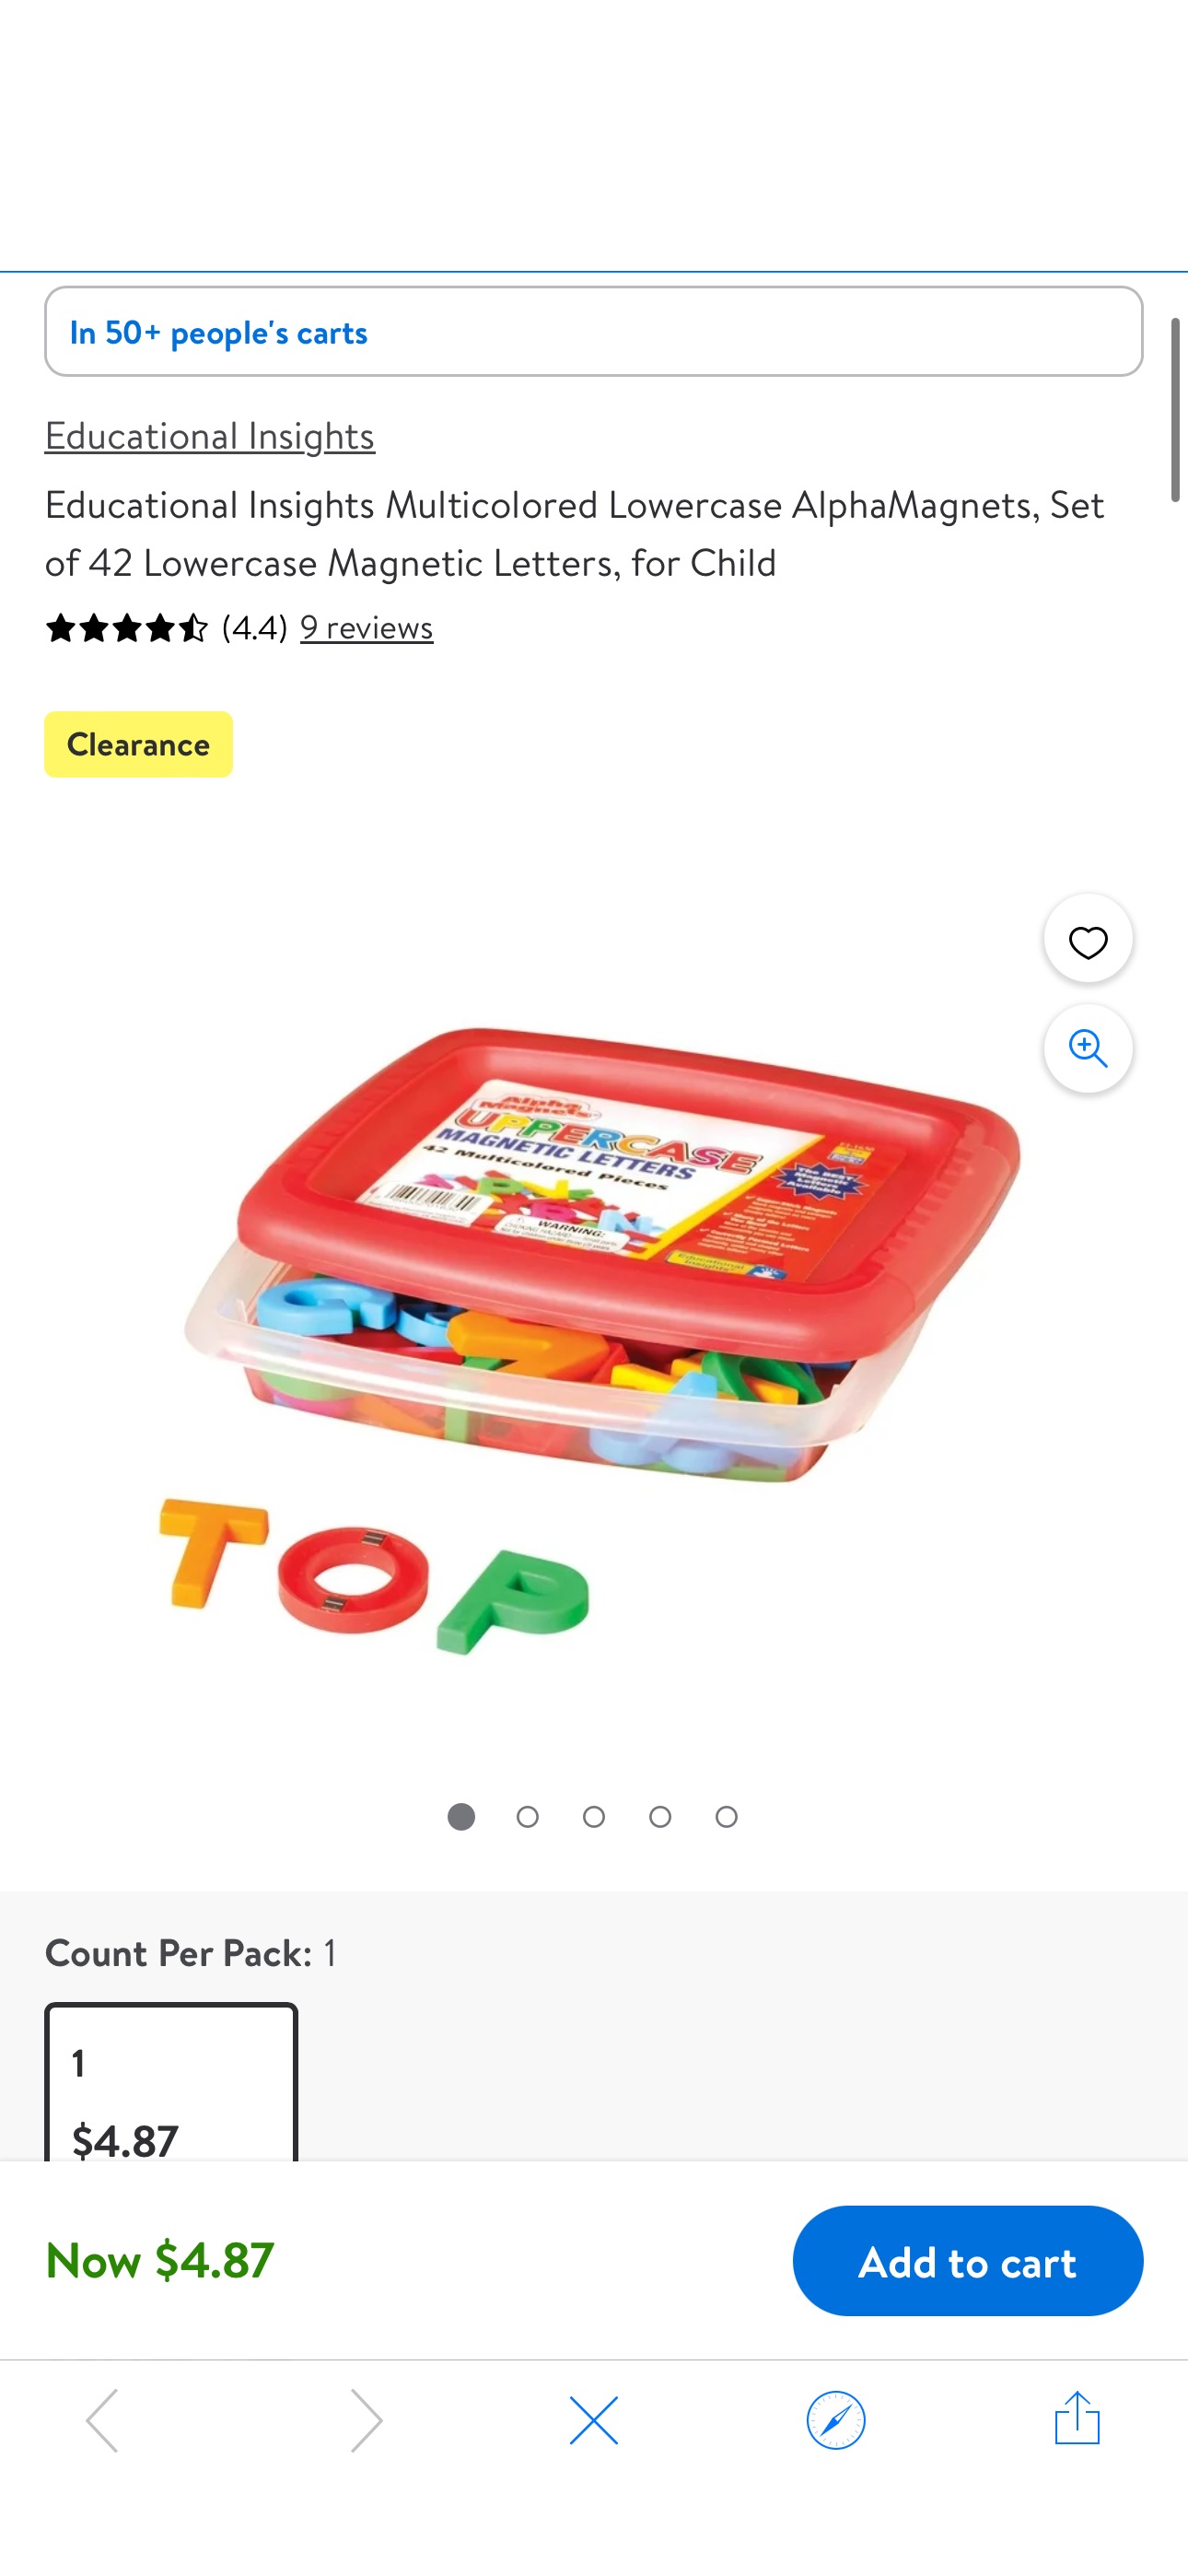 Educational Insights Multicolored Lowercase AlphaMagnets, Set of 42 Lowercase Magnetic Letters, for Child - Walmart.com